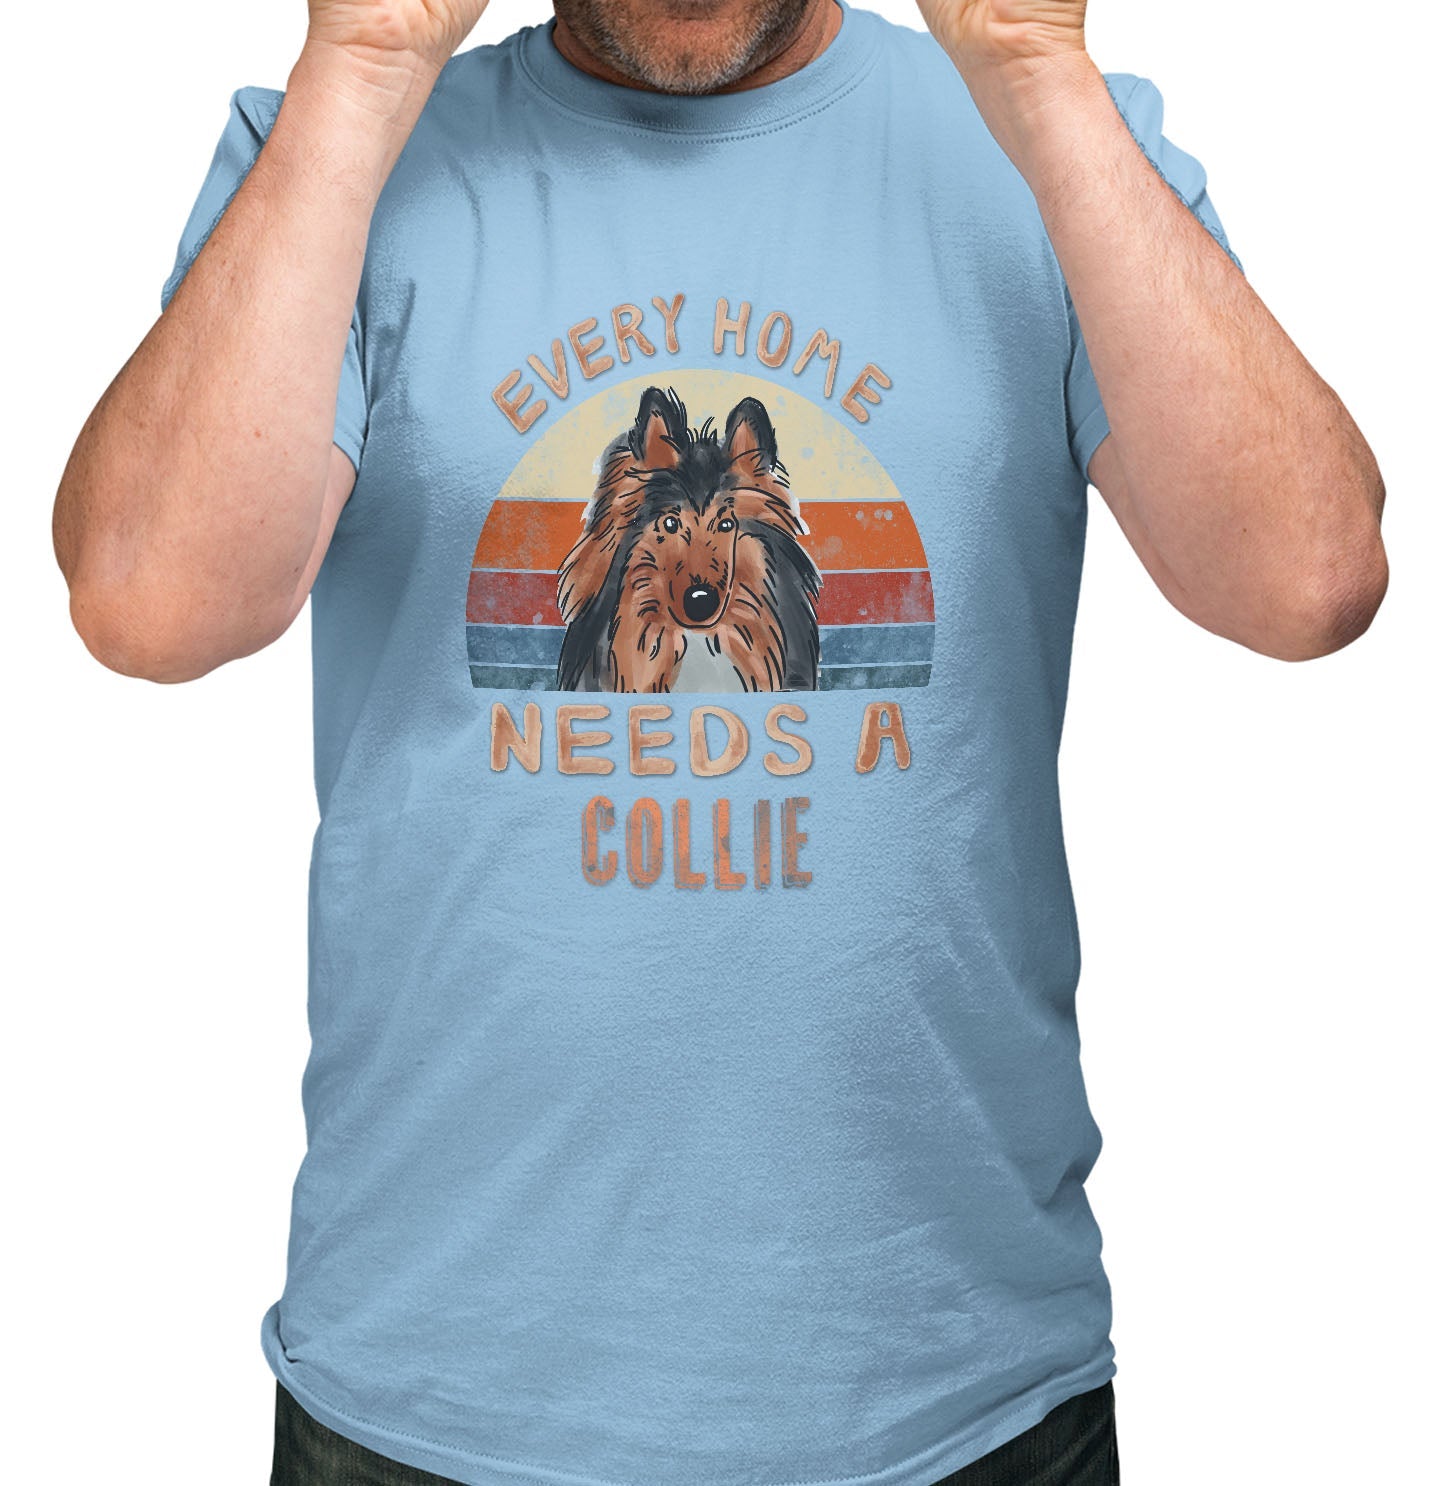 Every Home Needs a Collie - Adult Unisex T-Shirt